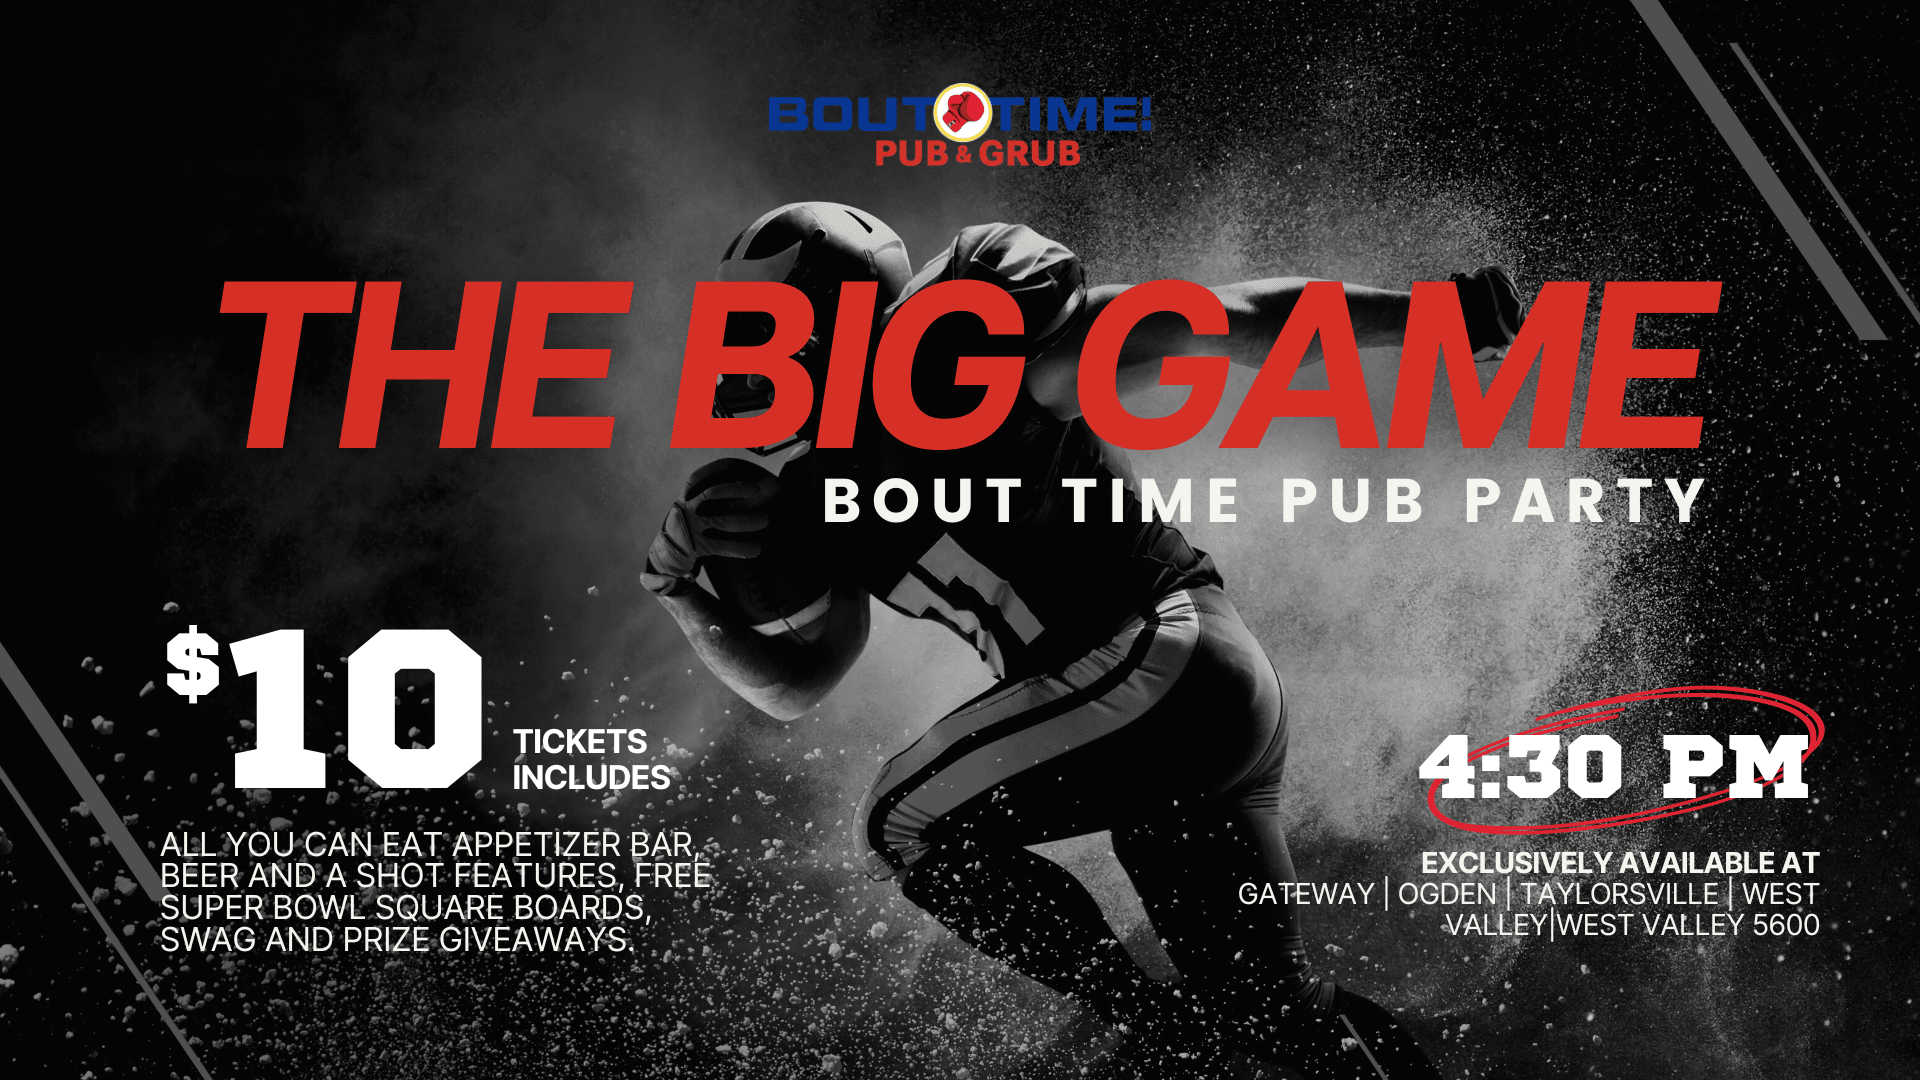 Bout Time Pub & grub branded infographic. Text reads: THE BIG GAME Bout Time Pub Party. $10 Tickets includes all you can eat appetizer bar, beer and a shot features, free super bowl square boards, swag and prize giveaways. 4:30PM. Exclusively available at Gateway, Ogden, Taylorsville, West Valley, West Valley 5600